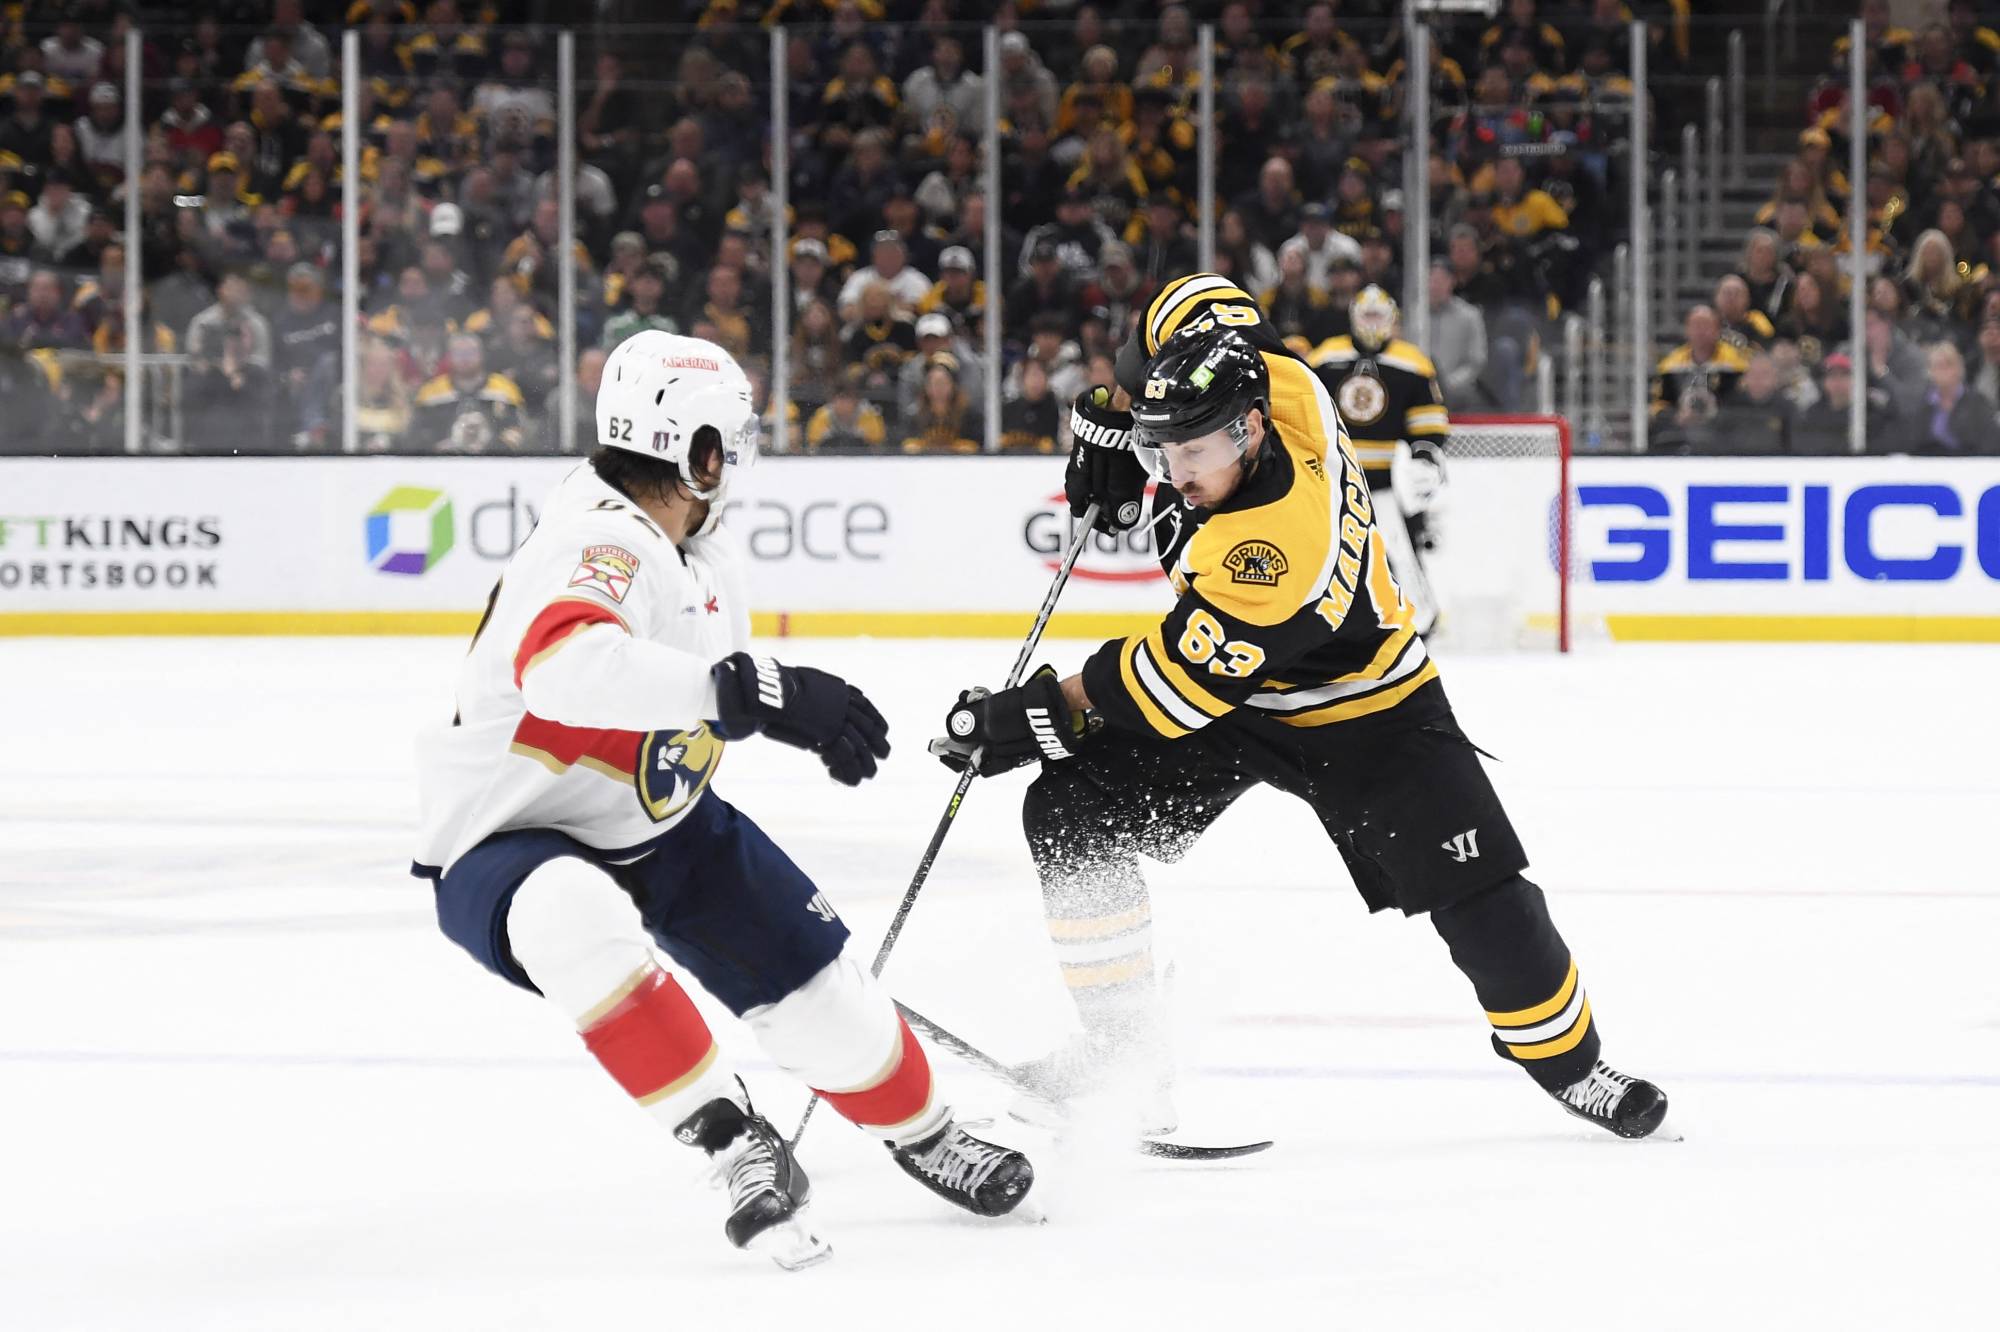 Bruins' record-breaking season ends with early exit as Panthers